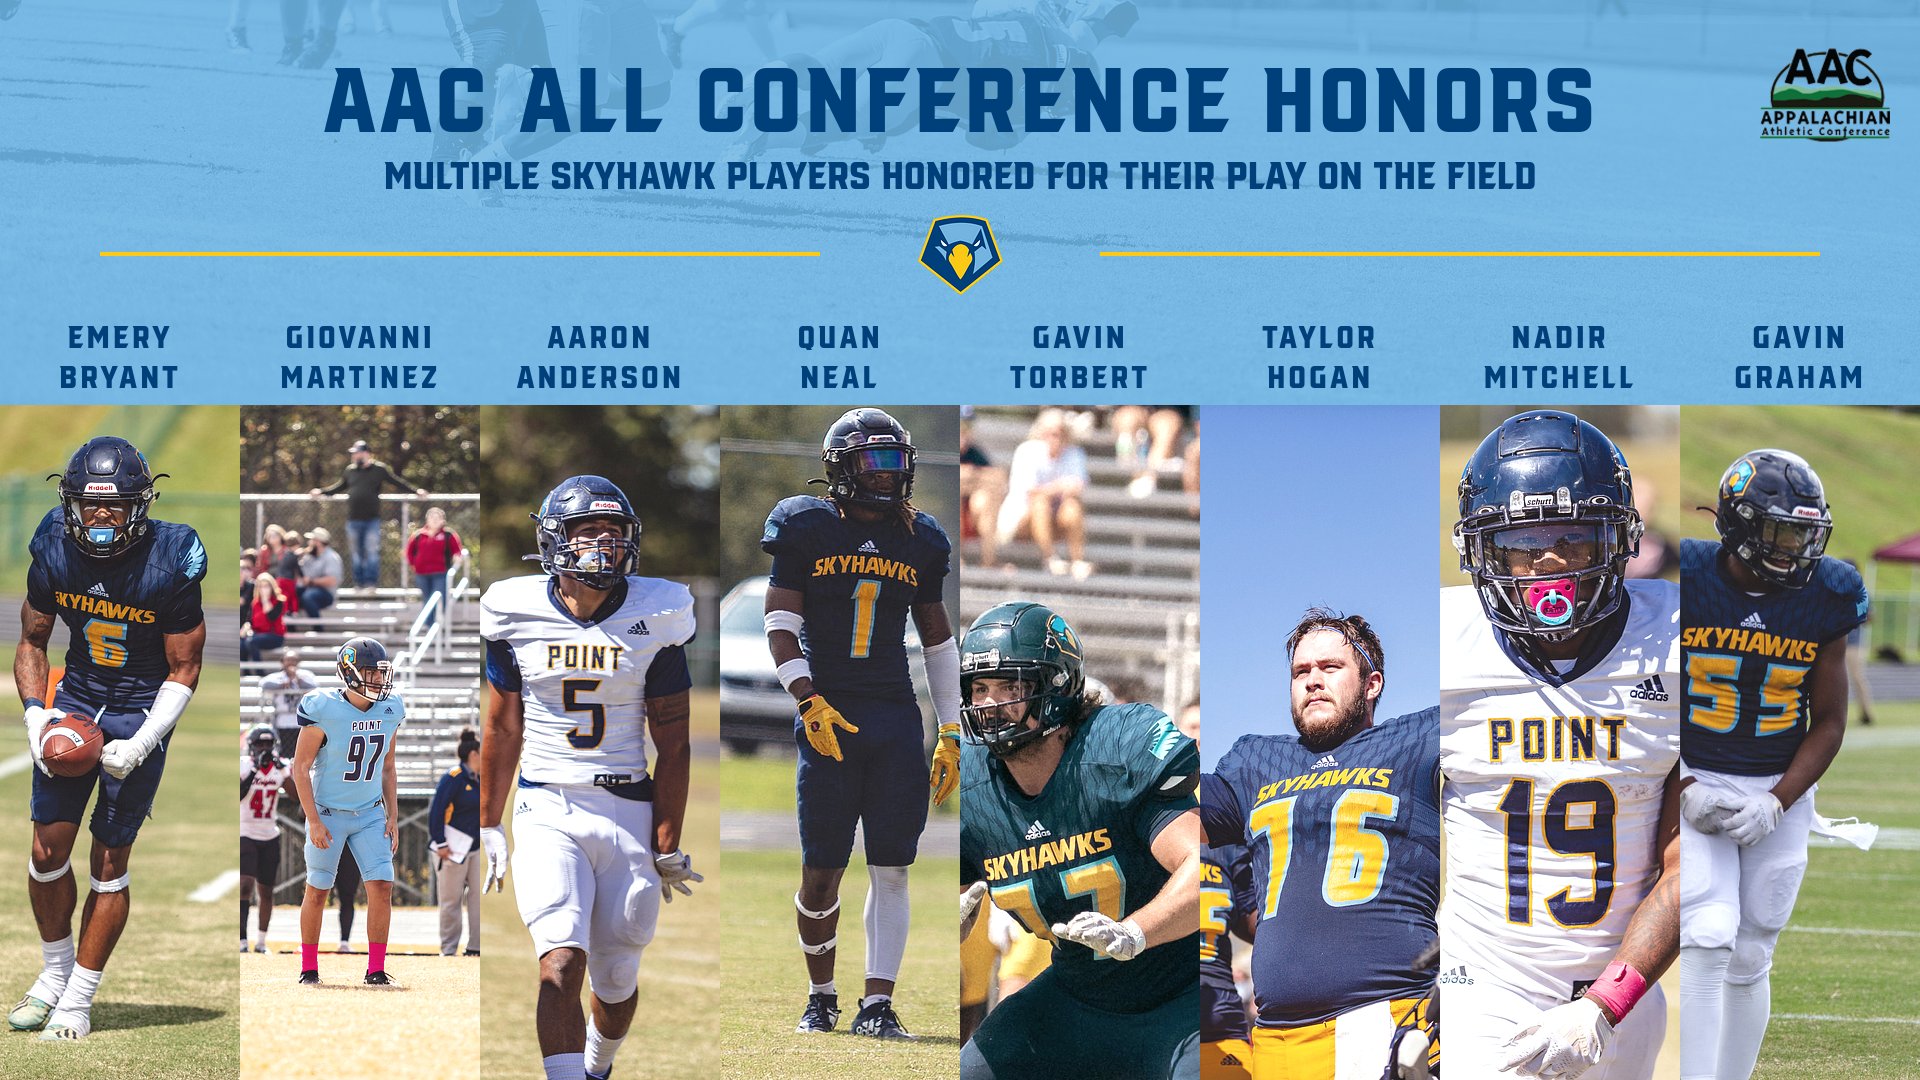 Point University Football Players highlight AAC All-Conference honors